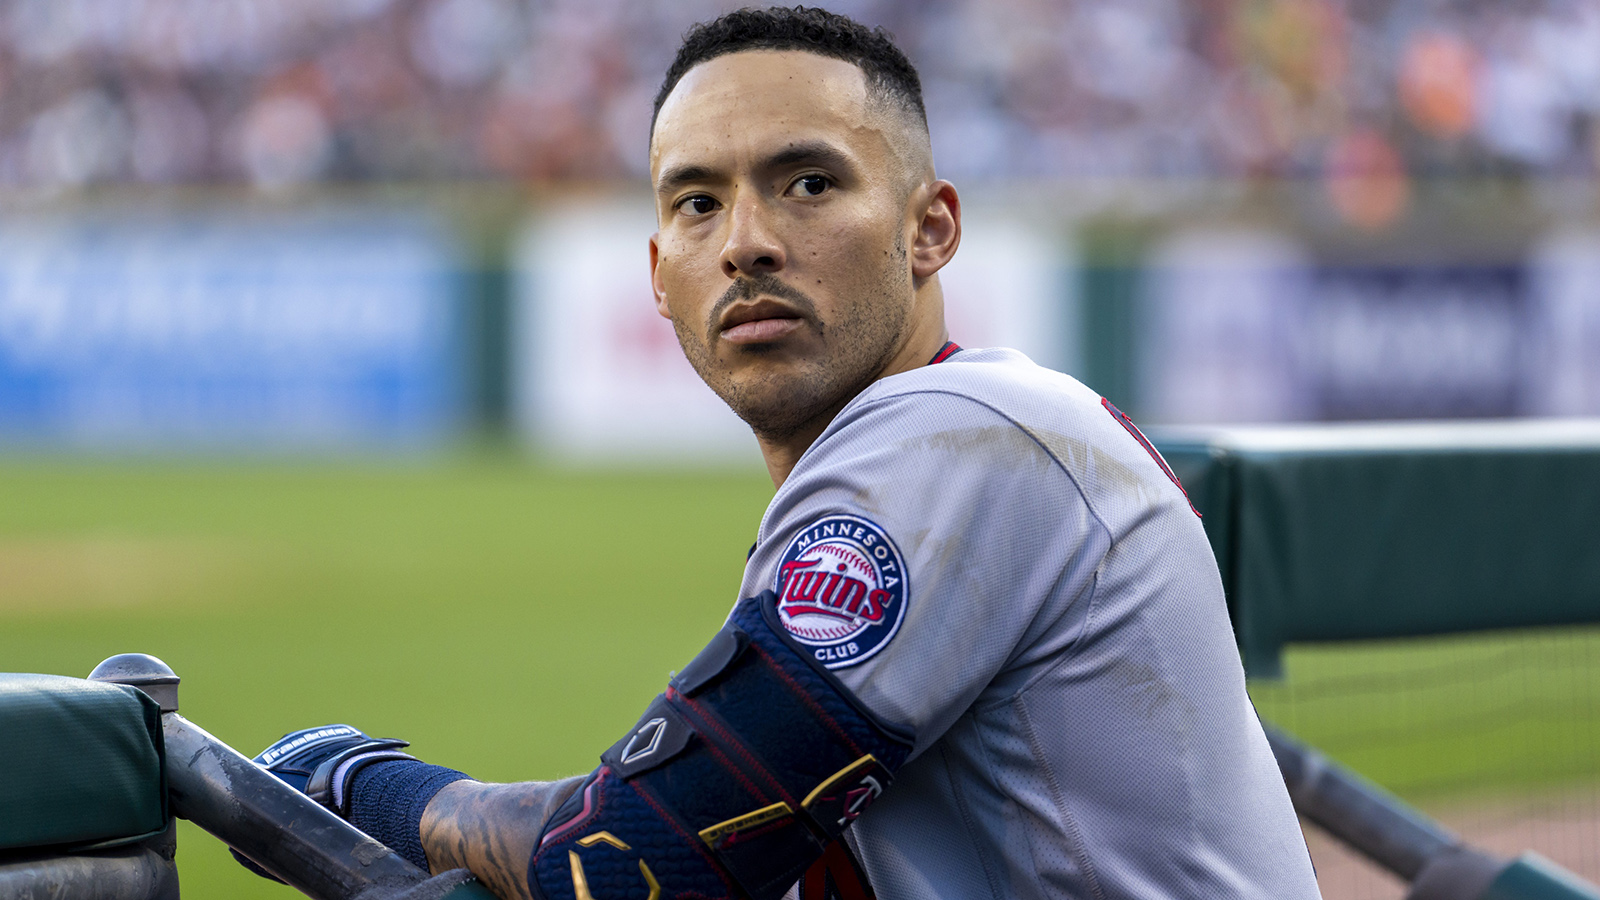 Carlos Correa agrees to 6-year deal to return to Minnesota Twins